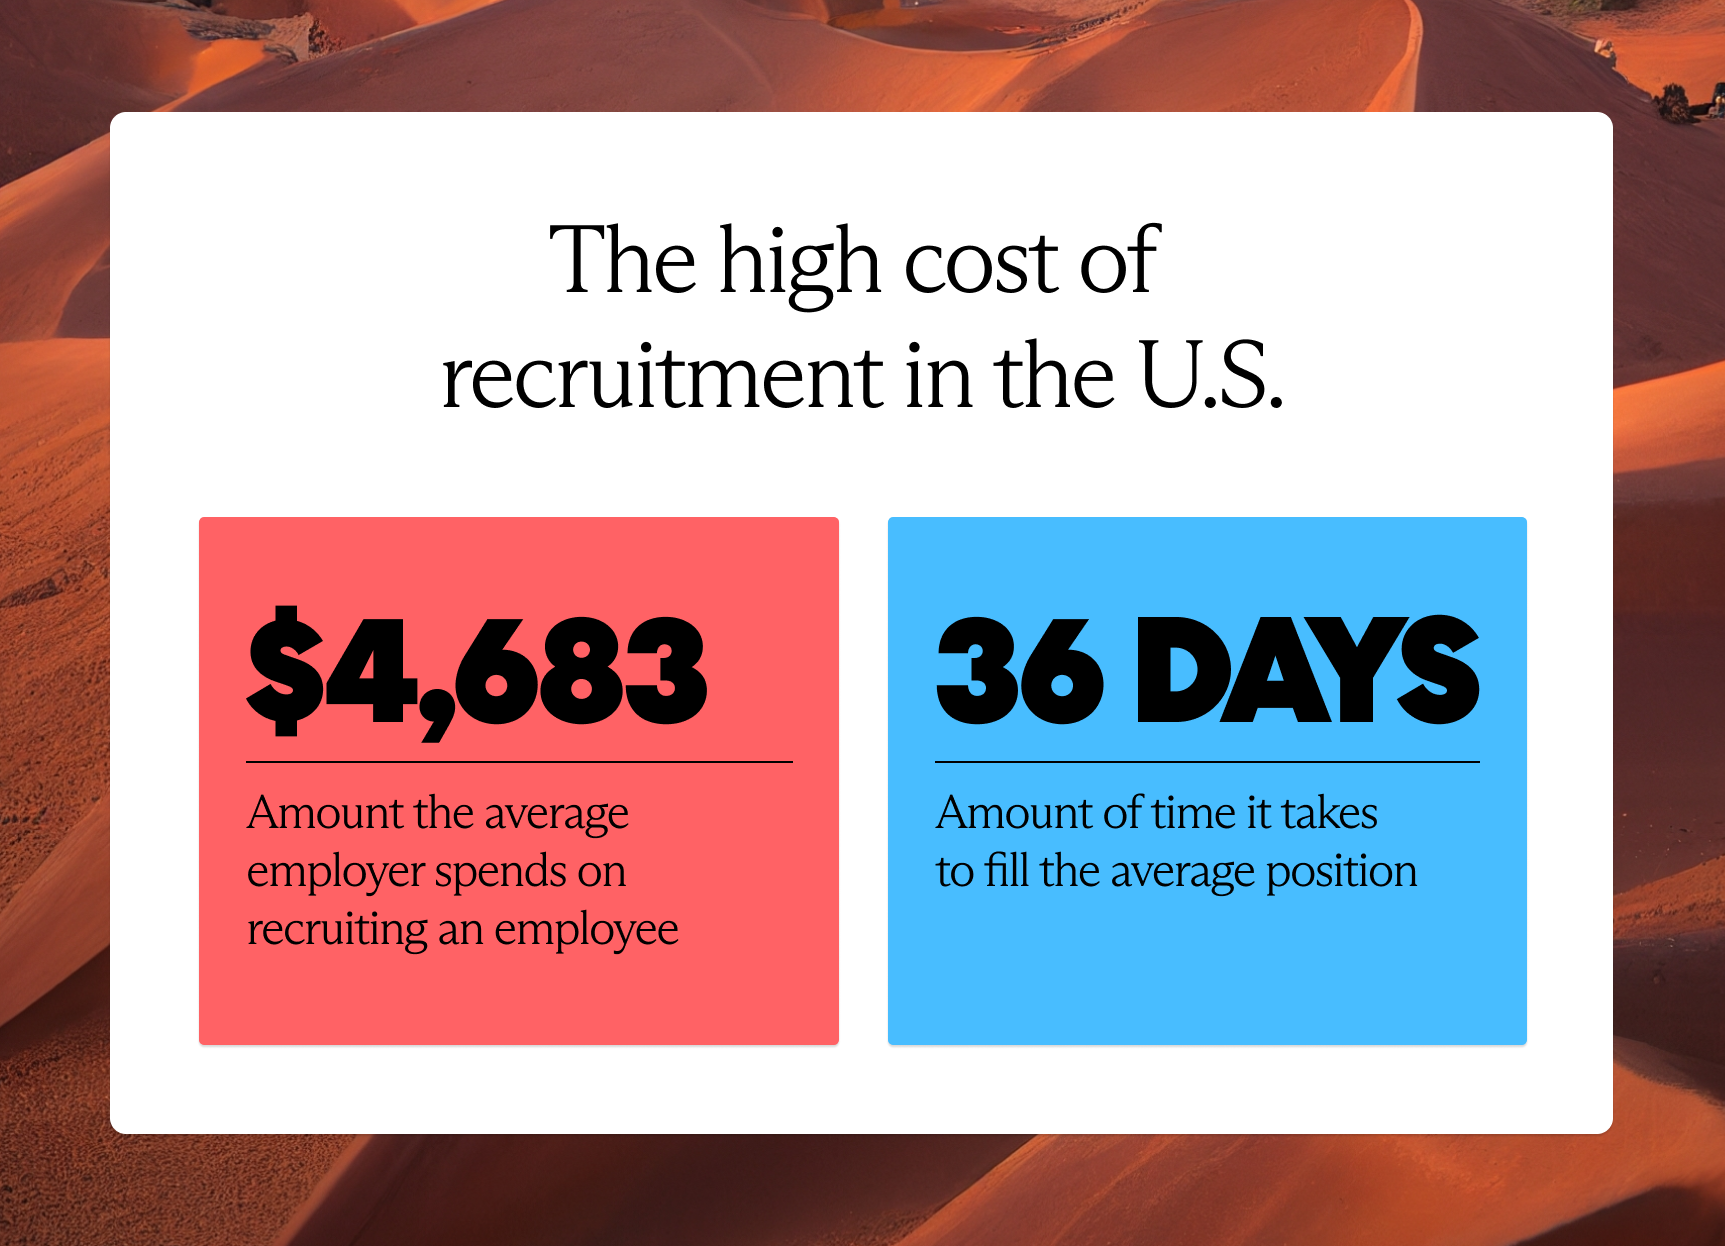 The high cost of recruitment in the U.S.